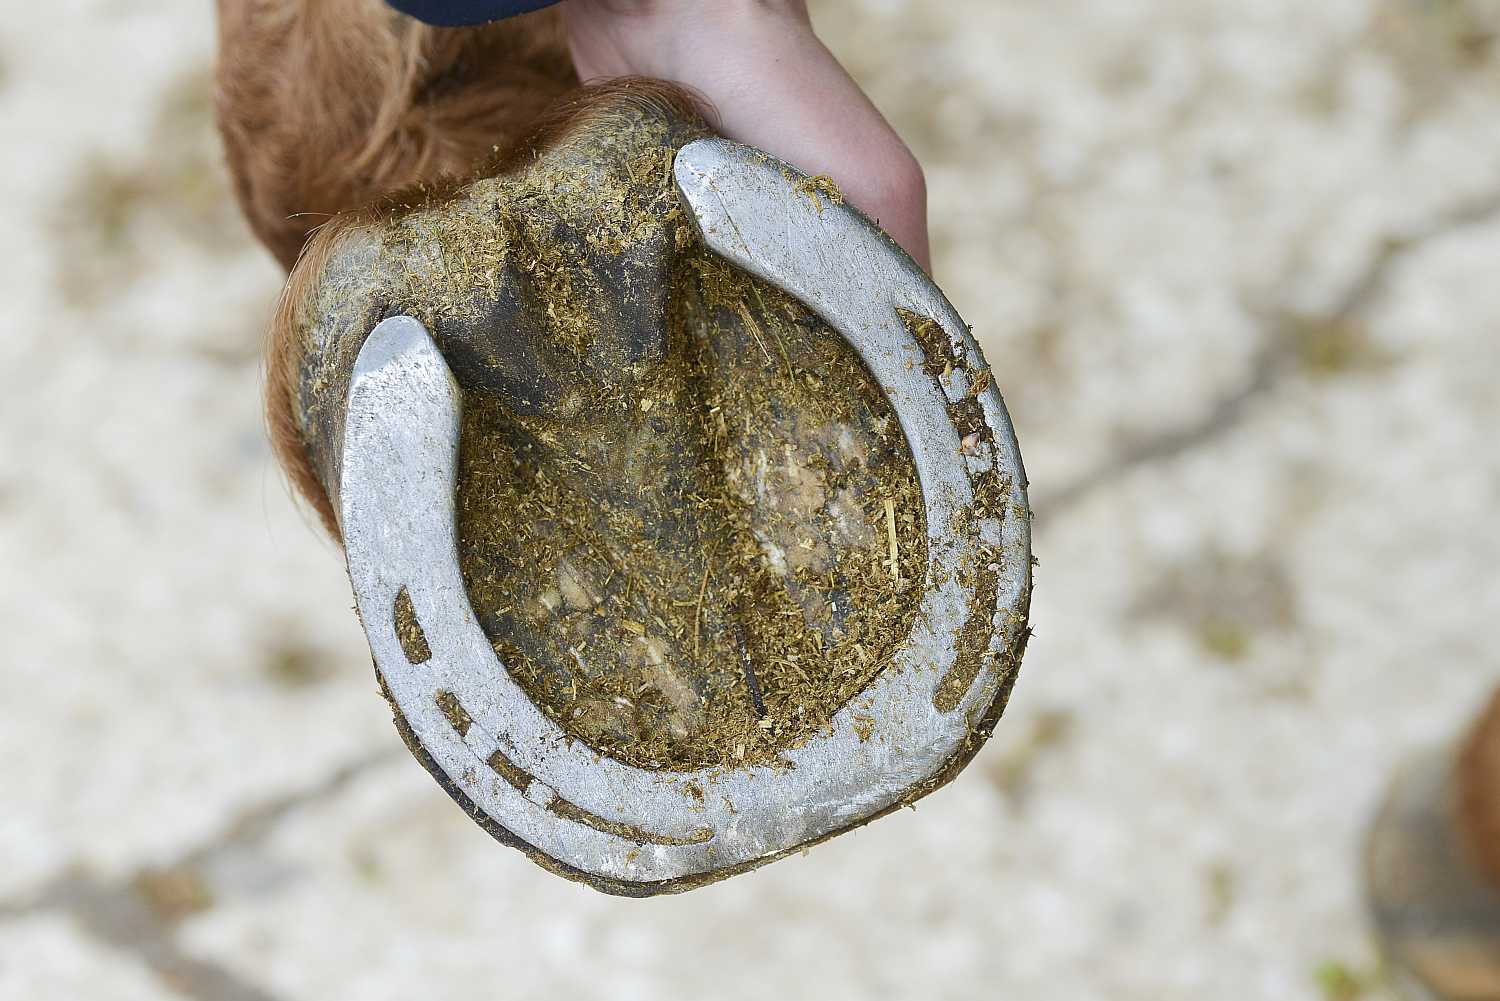 Person holding horse hoof with shoe, showing underside.